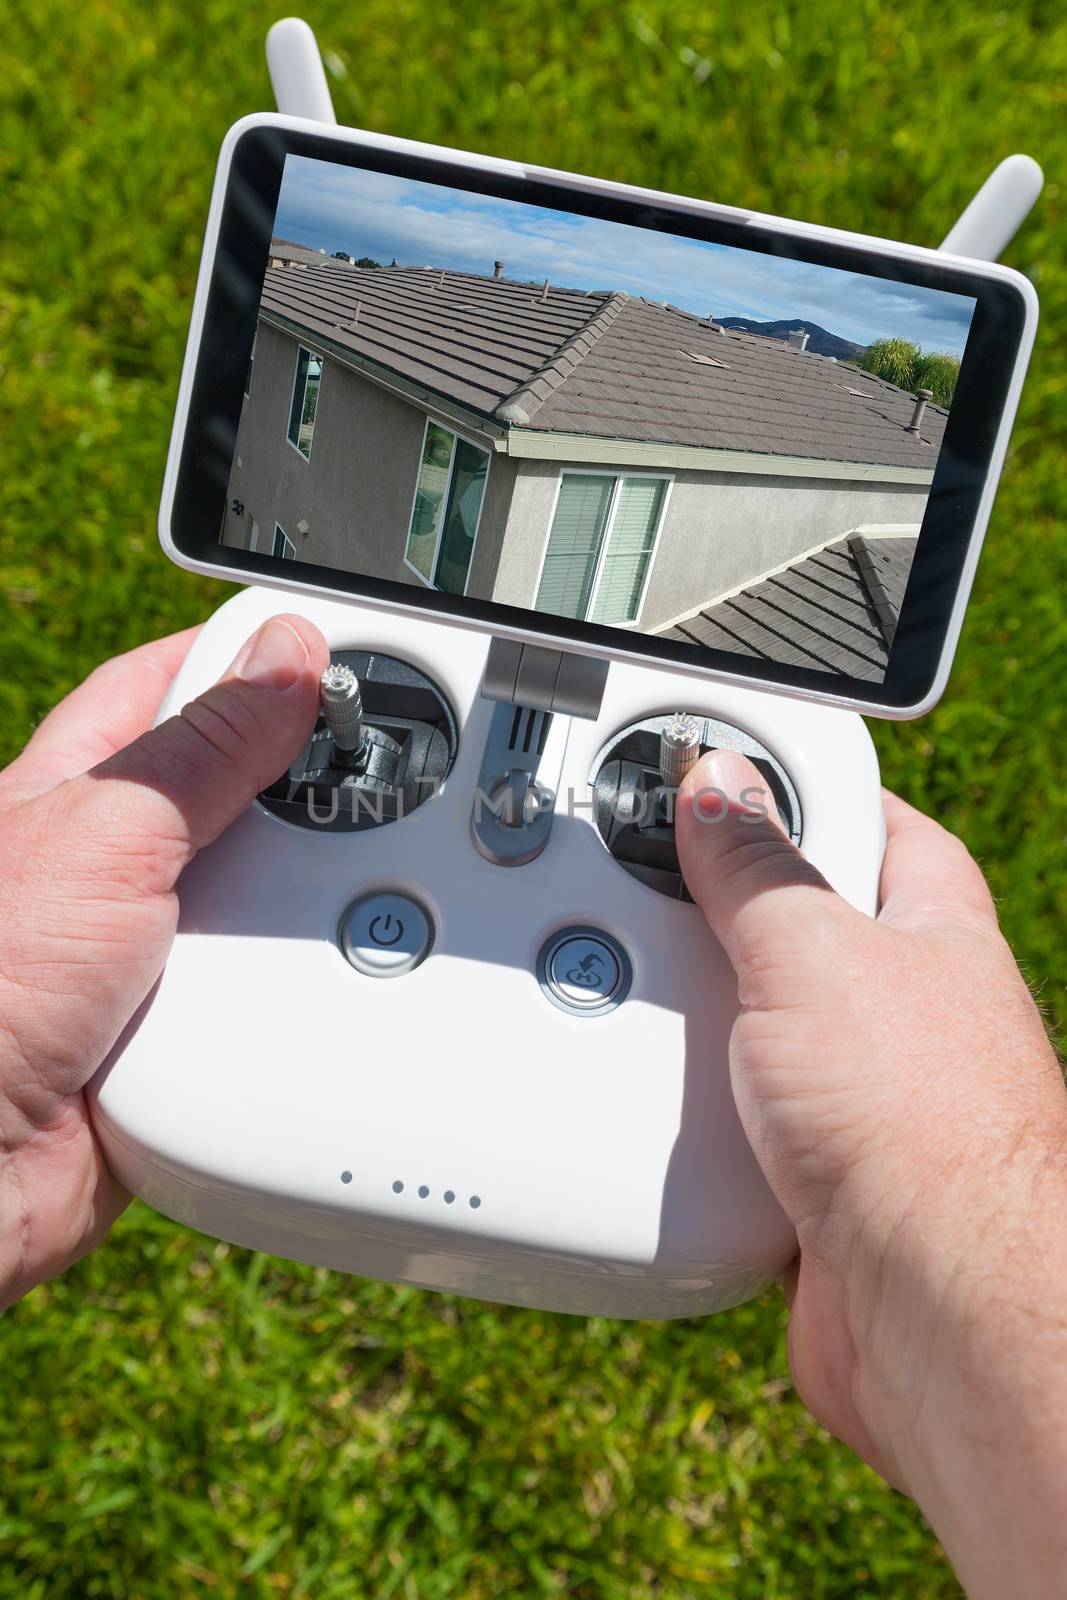 Hands Holding Drone Quadcopter Controller With Residential Roof Image on Screen. by Feverpitched